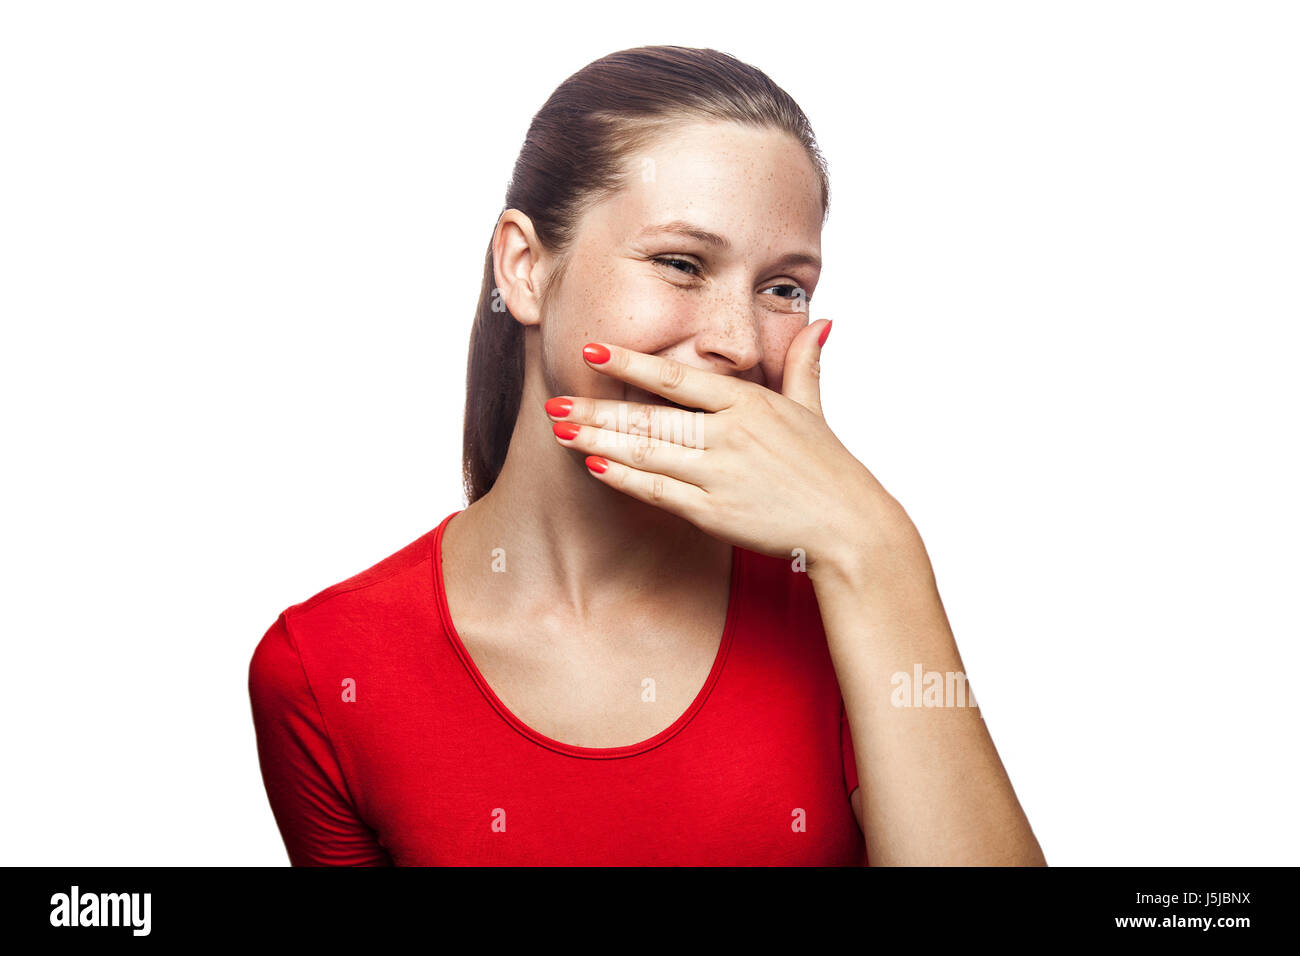 Portrait of happy laughter woman in red t-shirt with freckles with hand behind her mouth. studio shot. isolated on white background. Stock Photo